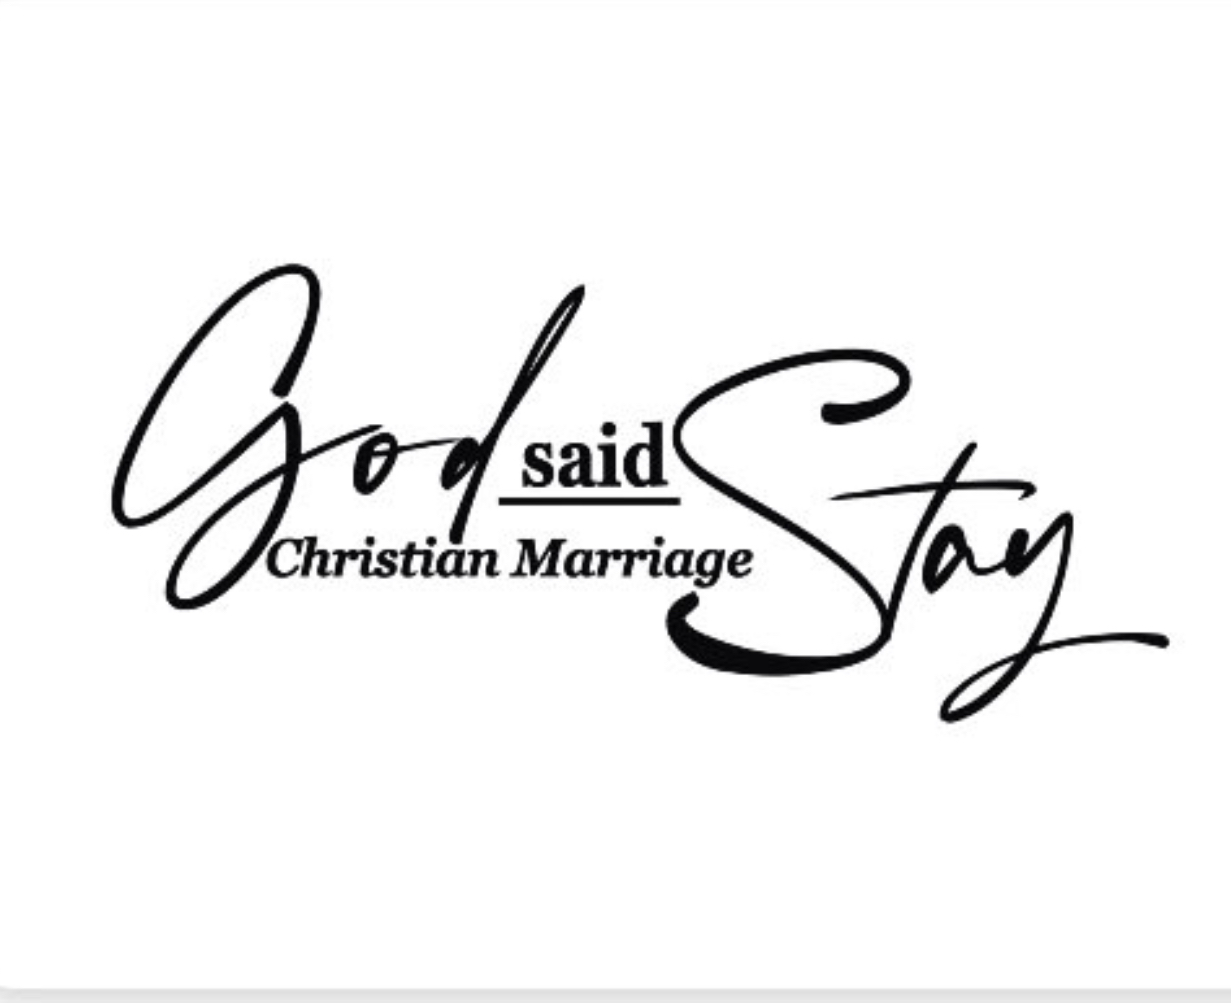 Godsaidstay.com Offers Free Resources And Advice To Help Couples With Failing Marriages Sort Out Their Differences